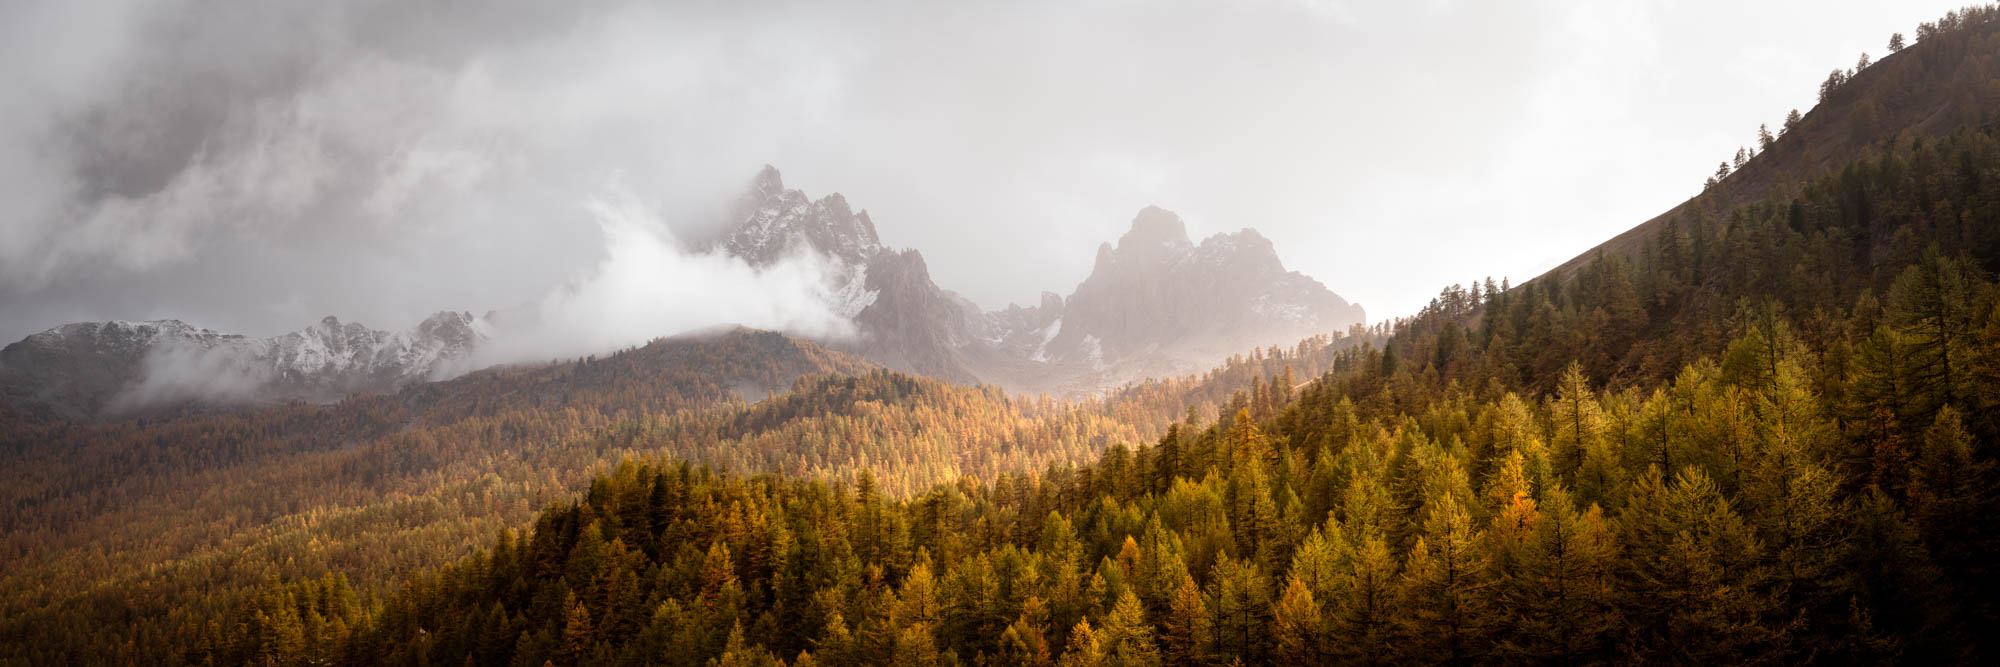 Panorama of the Golden Mountains of Vallée de la Clarée in Autumn in the French Alps